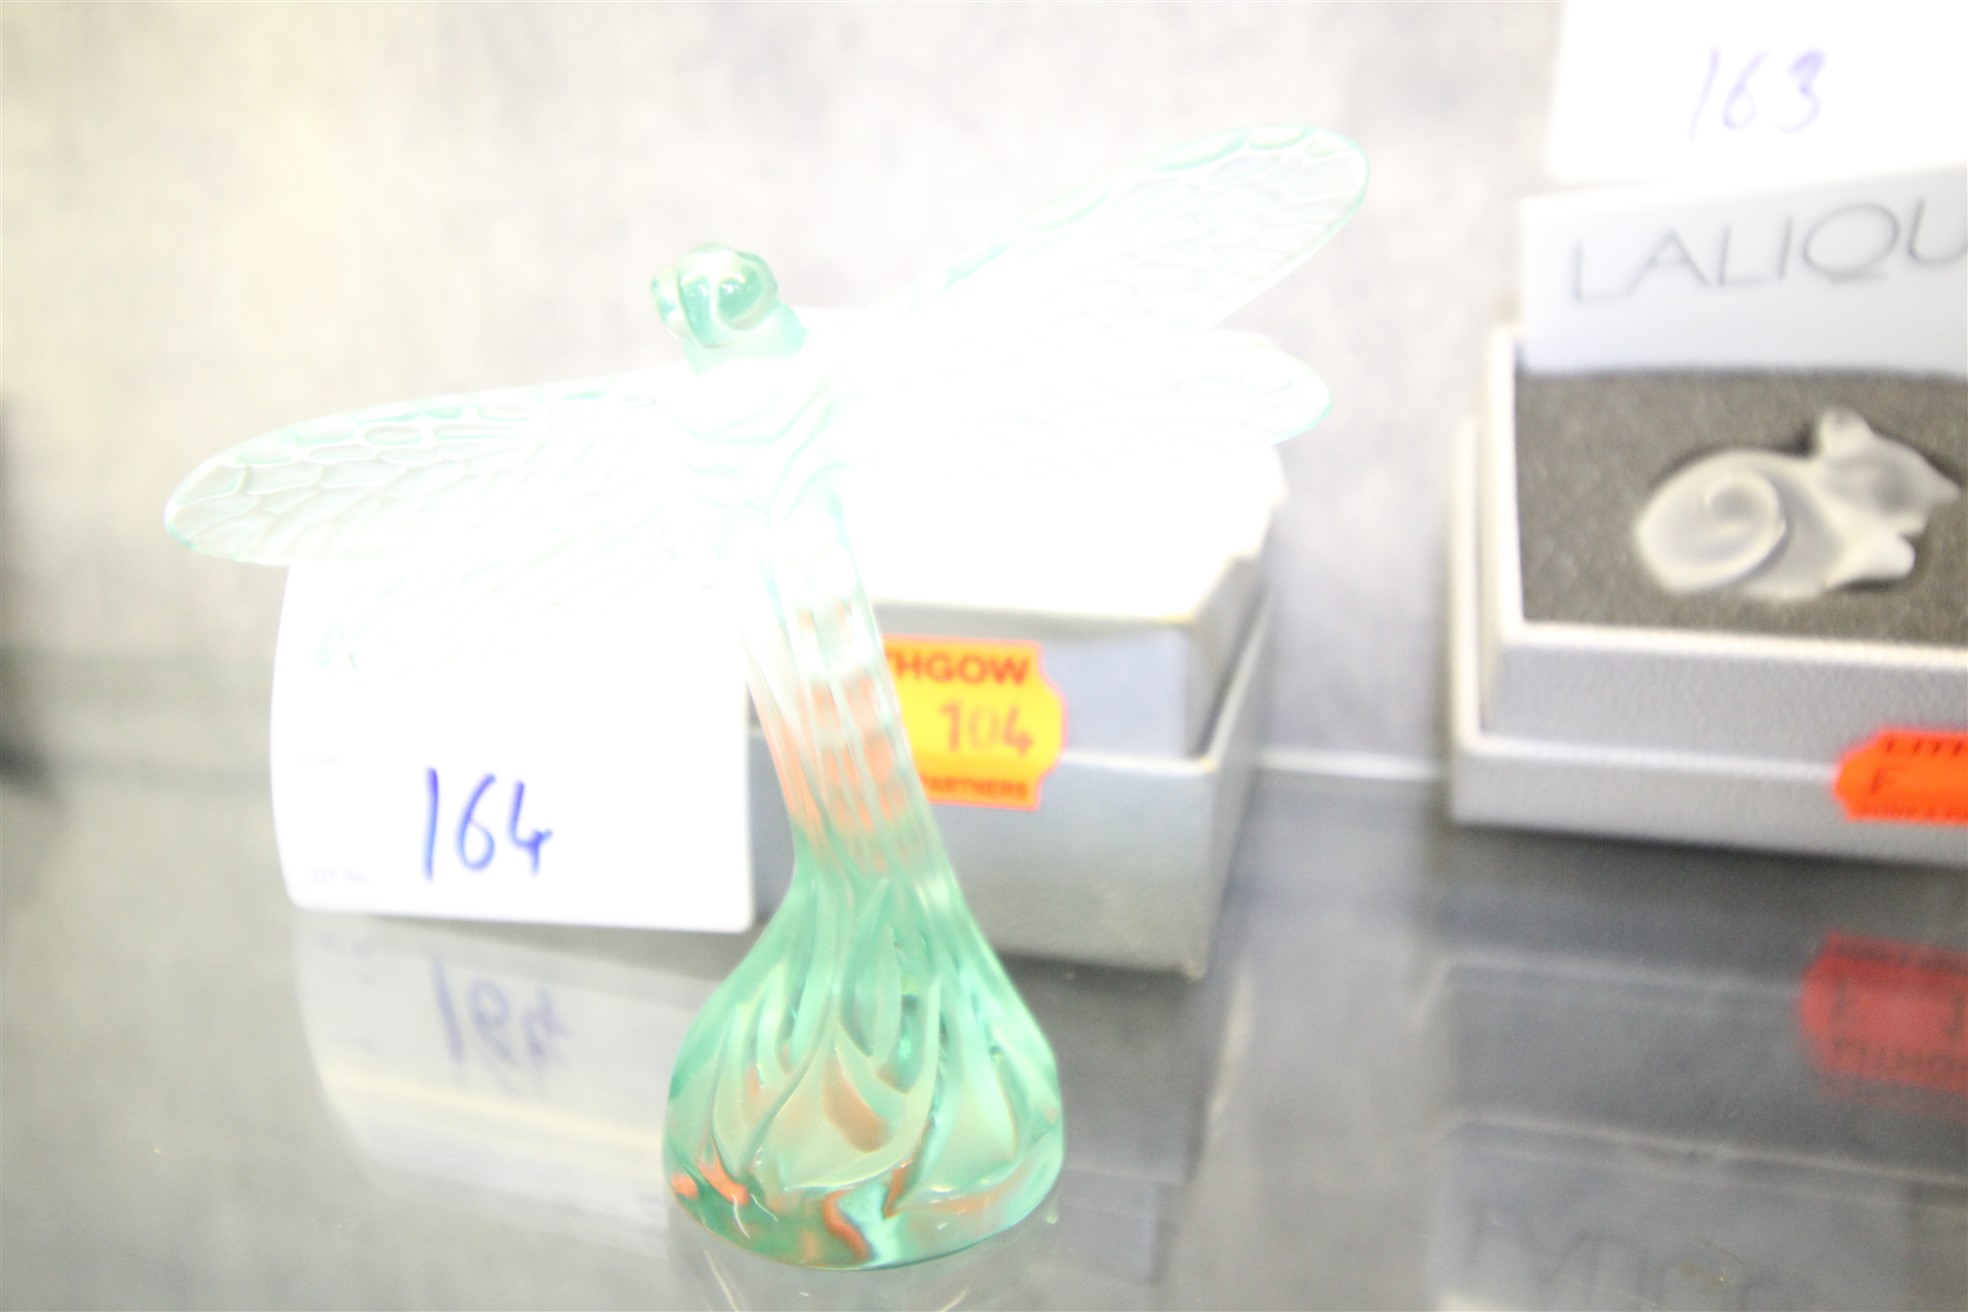 Lot 164 - Lalique Dragon Fly - £105